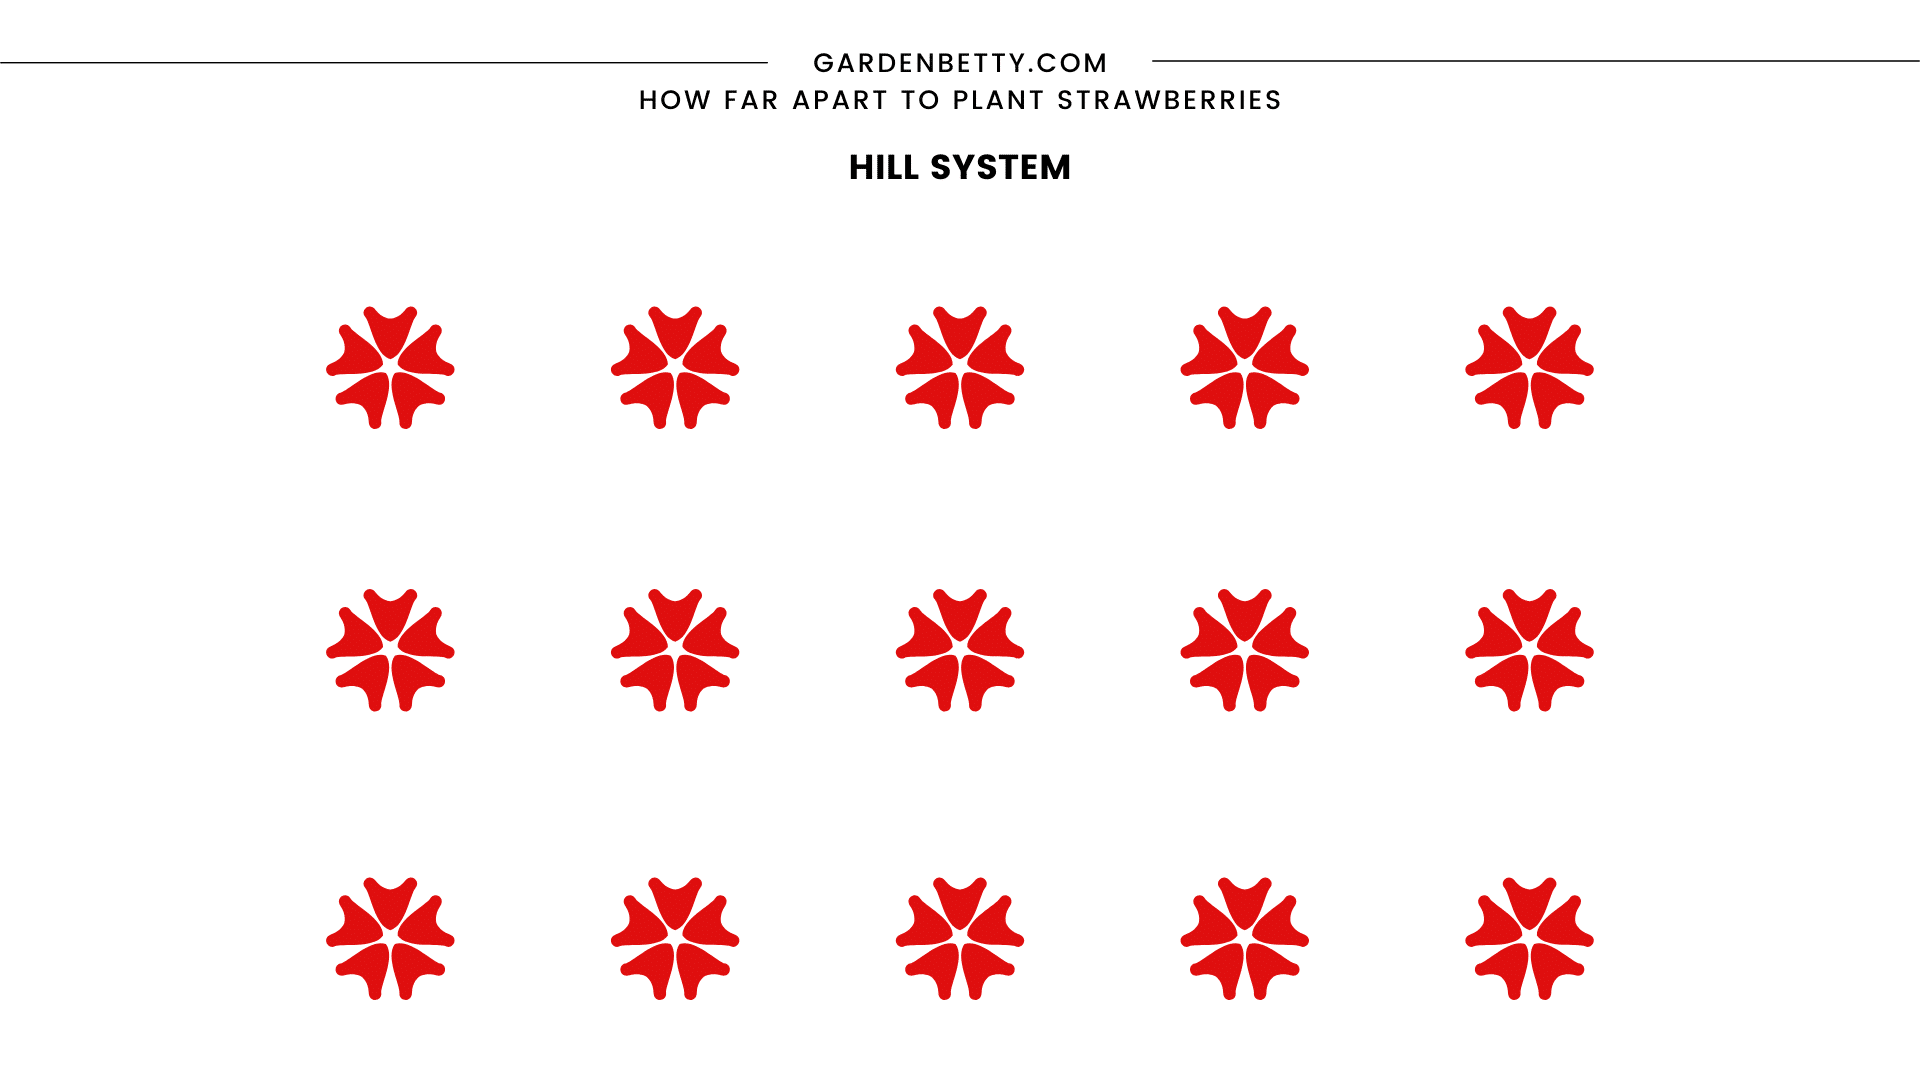 Illustration showing the hill system of spacing and planting strawberries